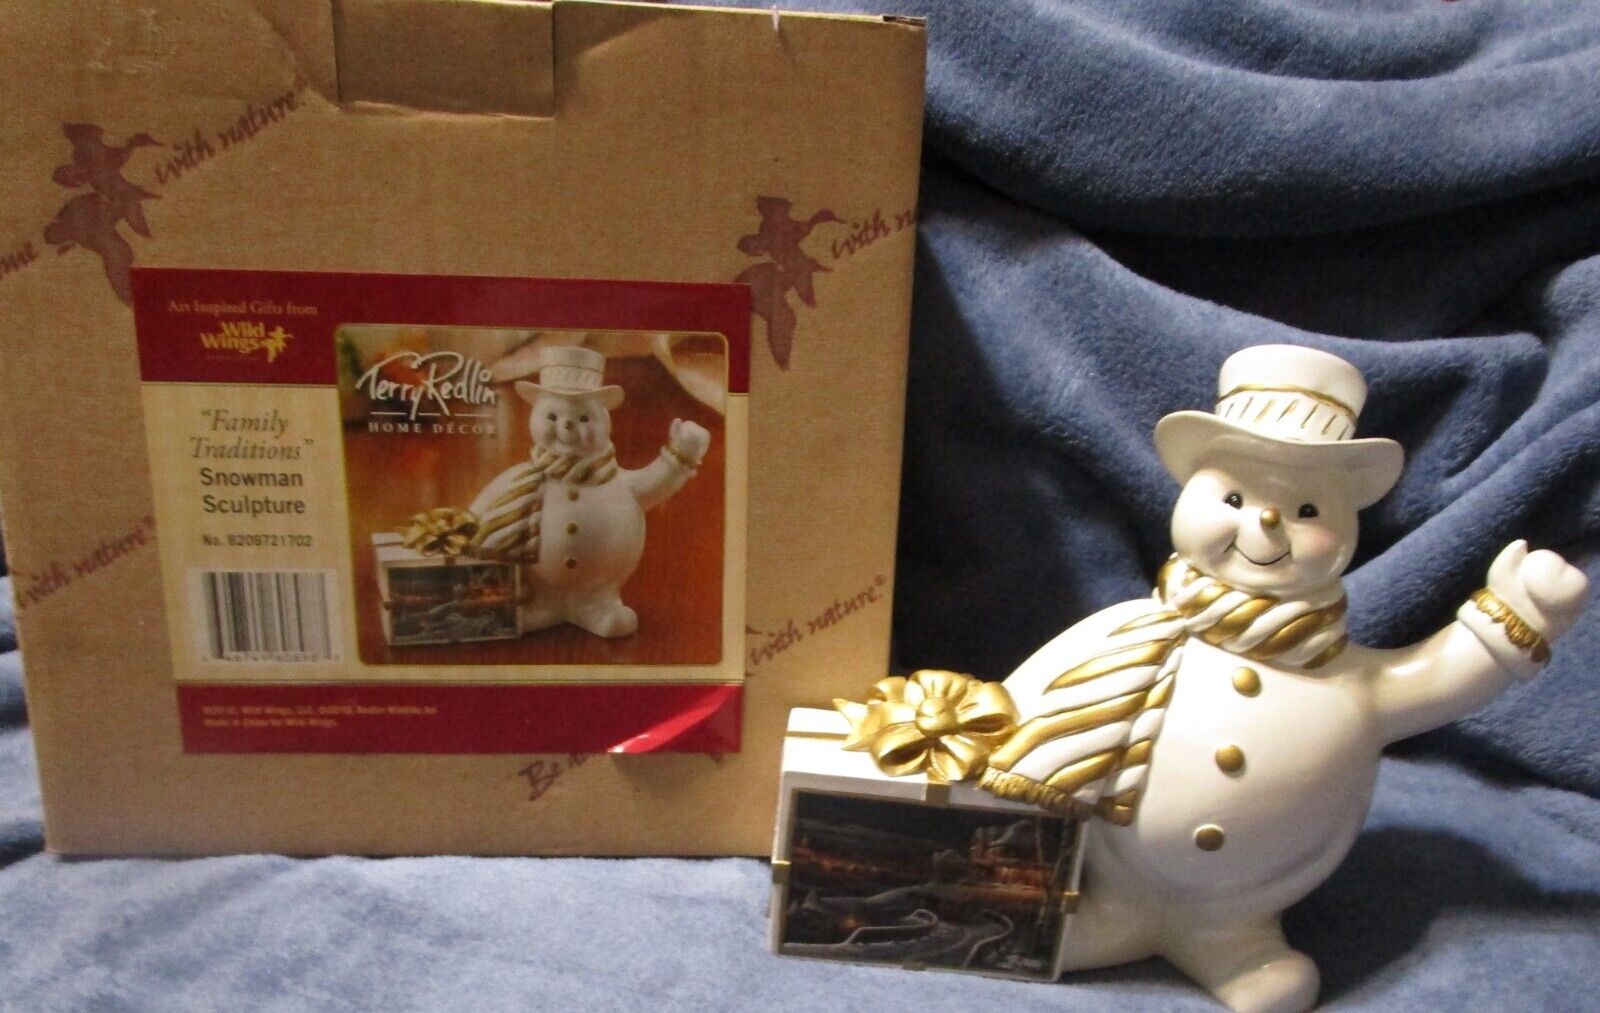 Terry Redlin Family Traditions Snowman Sculpture Figurine MIB Retired.